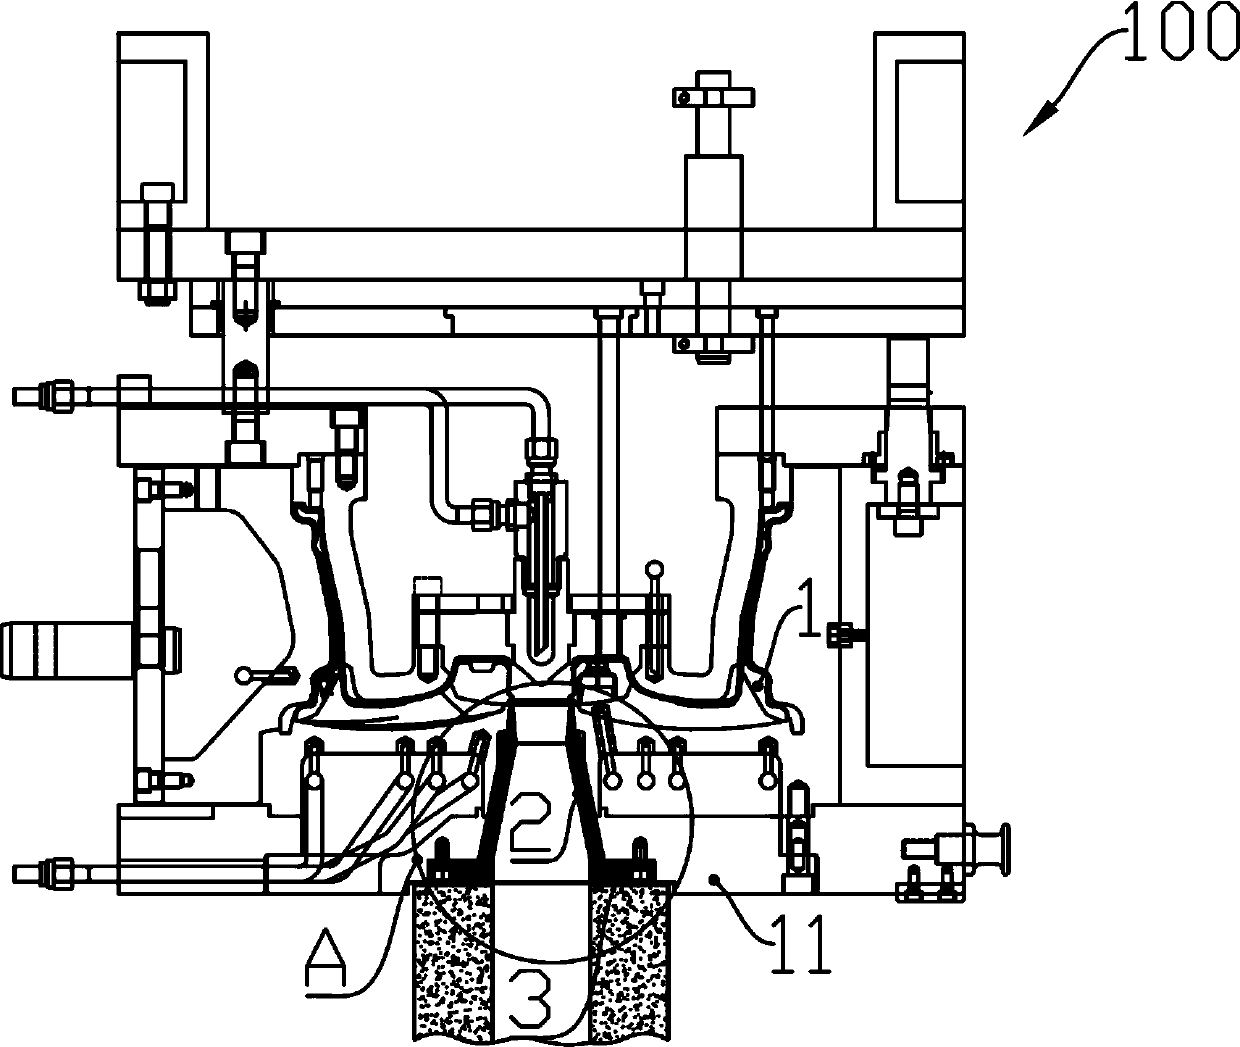 Riser for transporting molten metal for casting and casting mold for its application